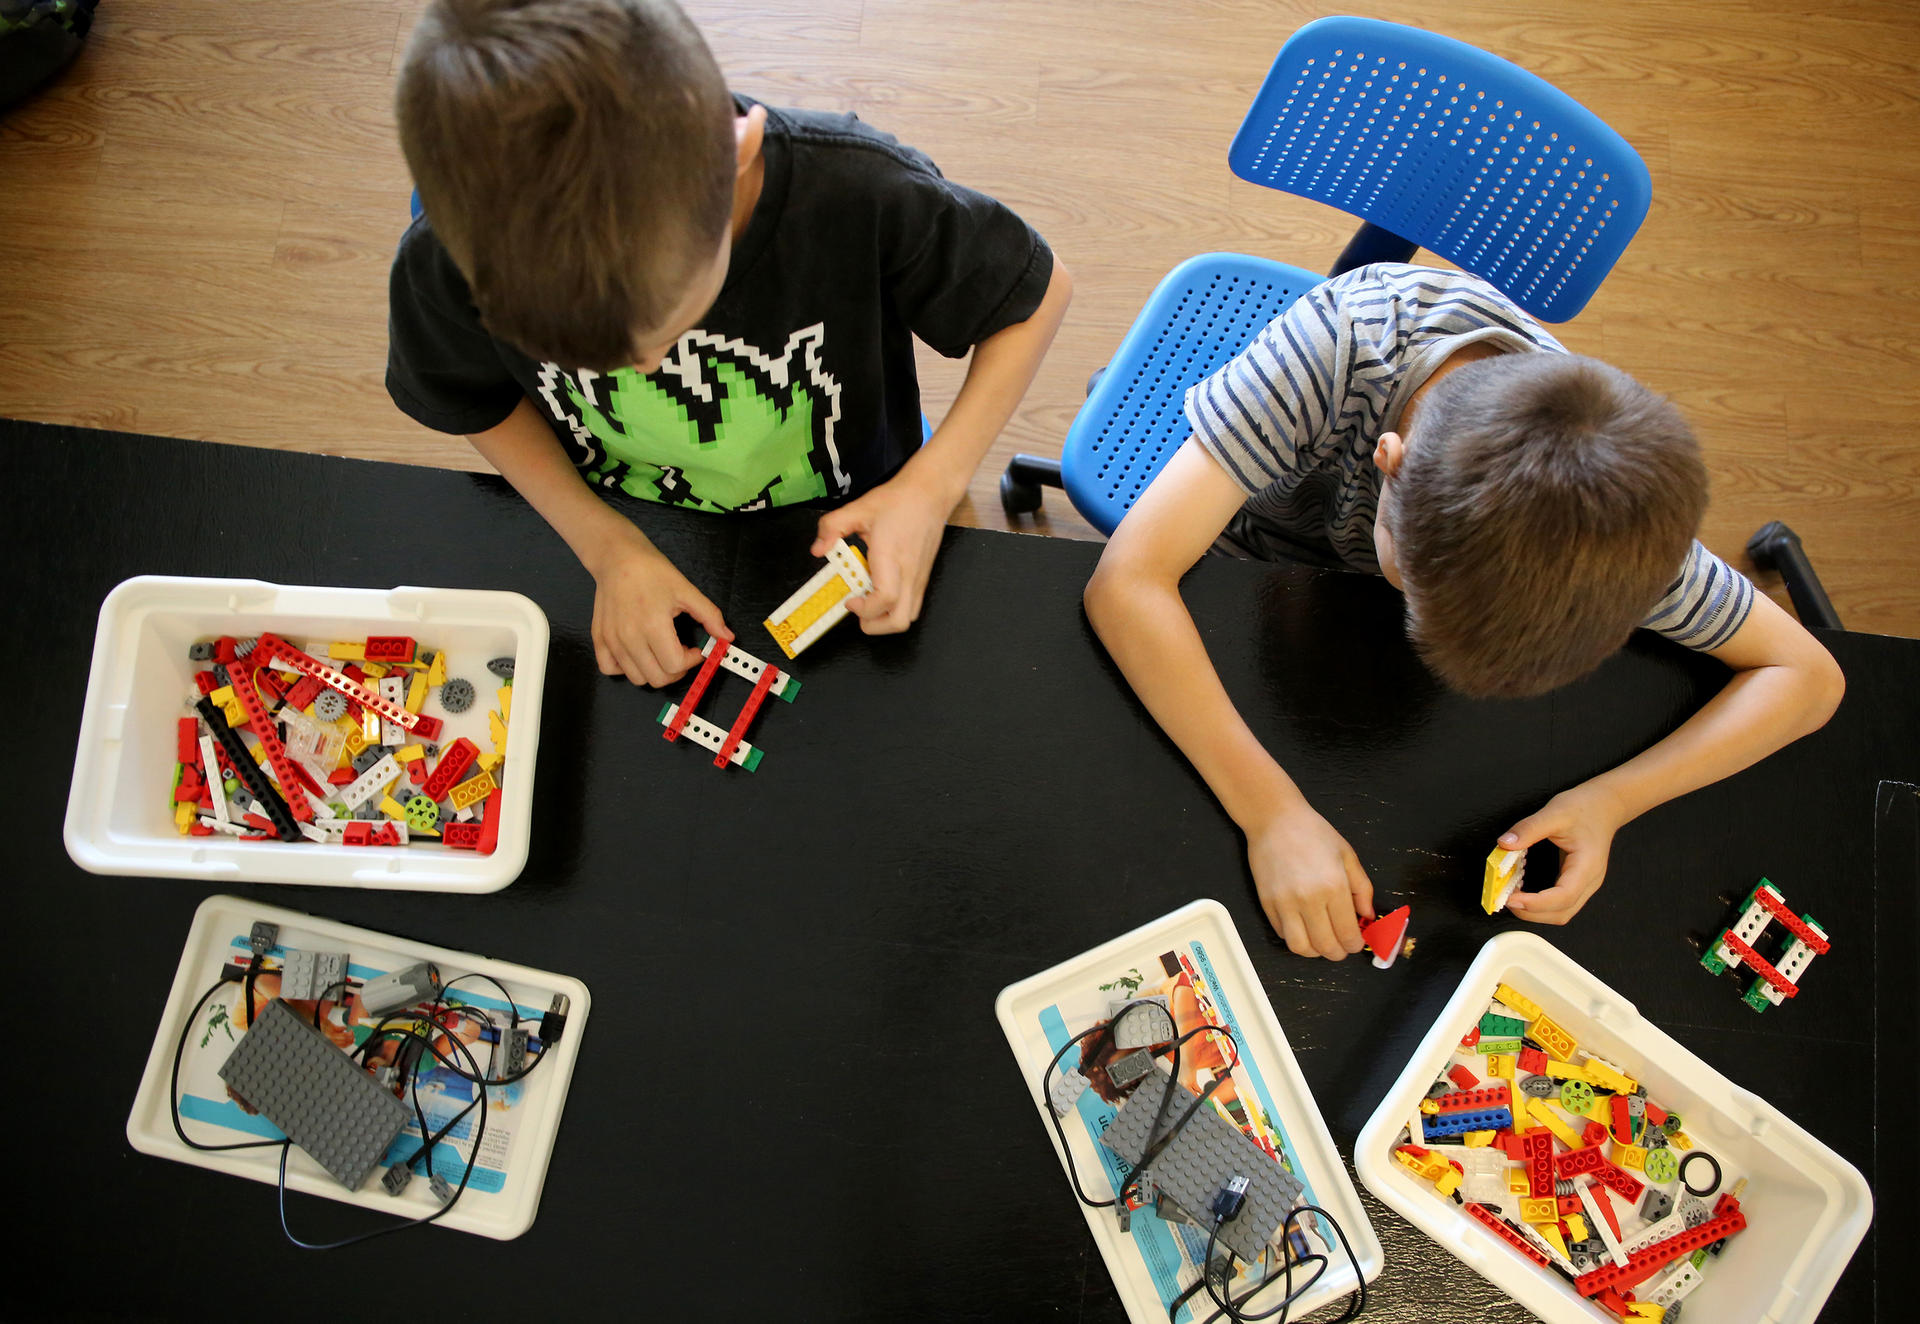 William Lerner, left, and William Kaegi learn coding skills while playing with blocks during a sports/coding summer camp in the US state of Illinois. Photo: Antonio Perez